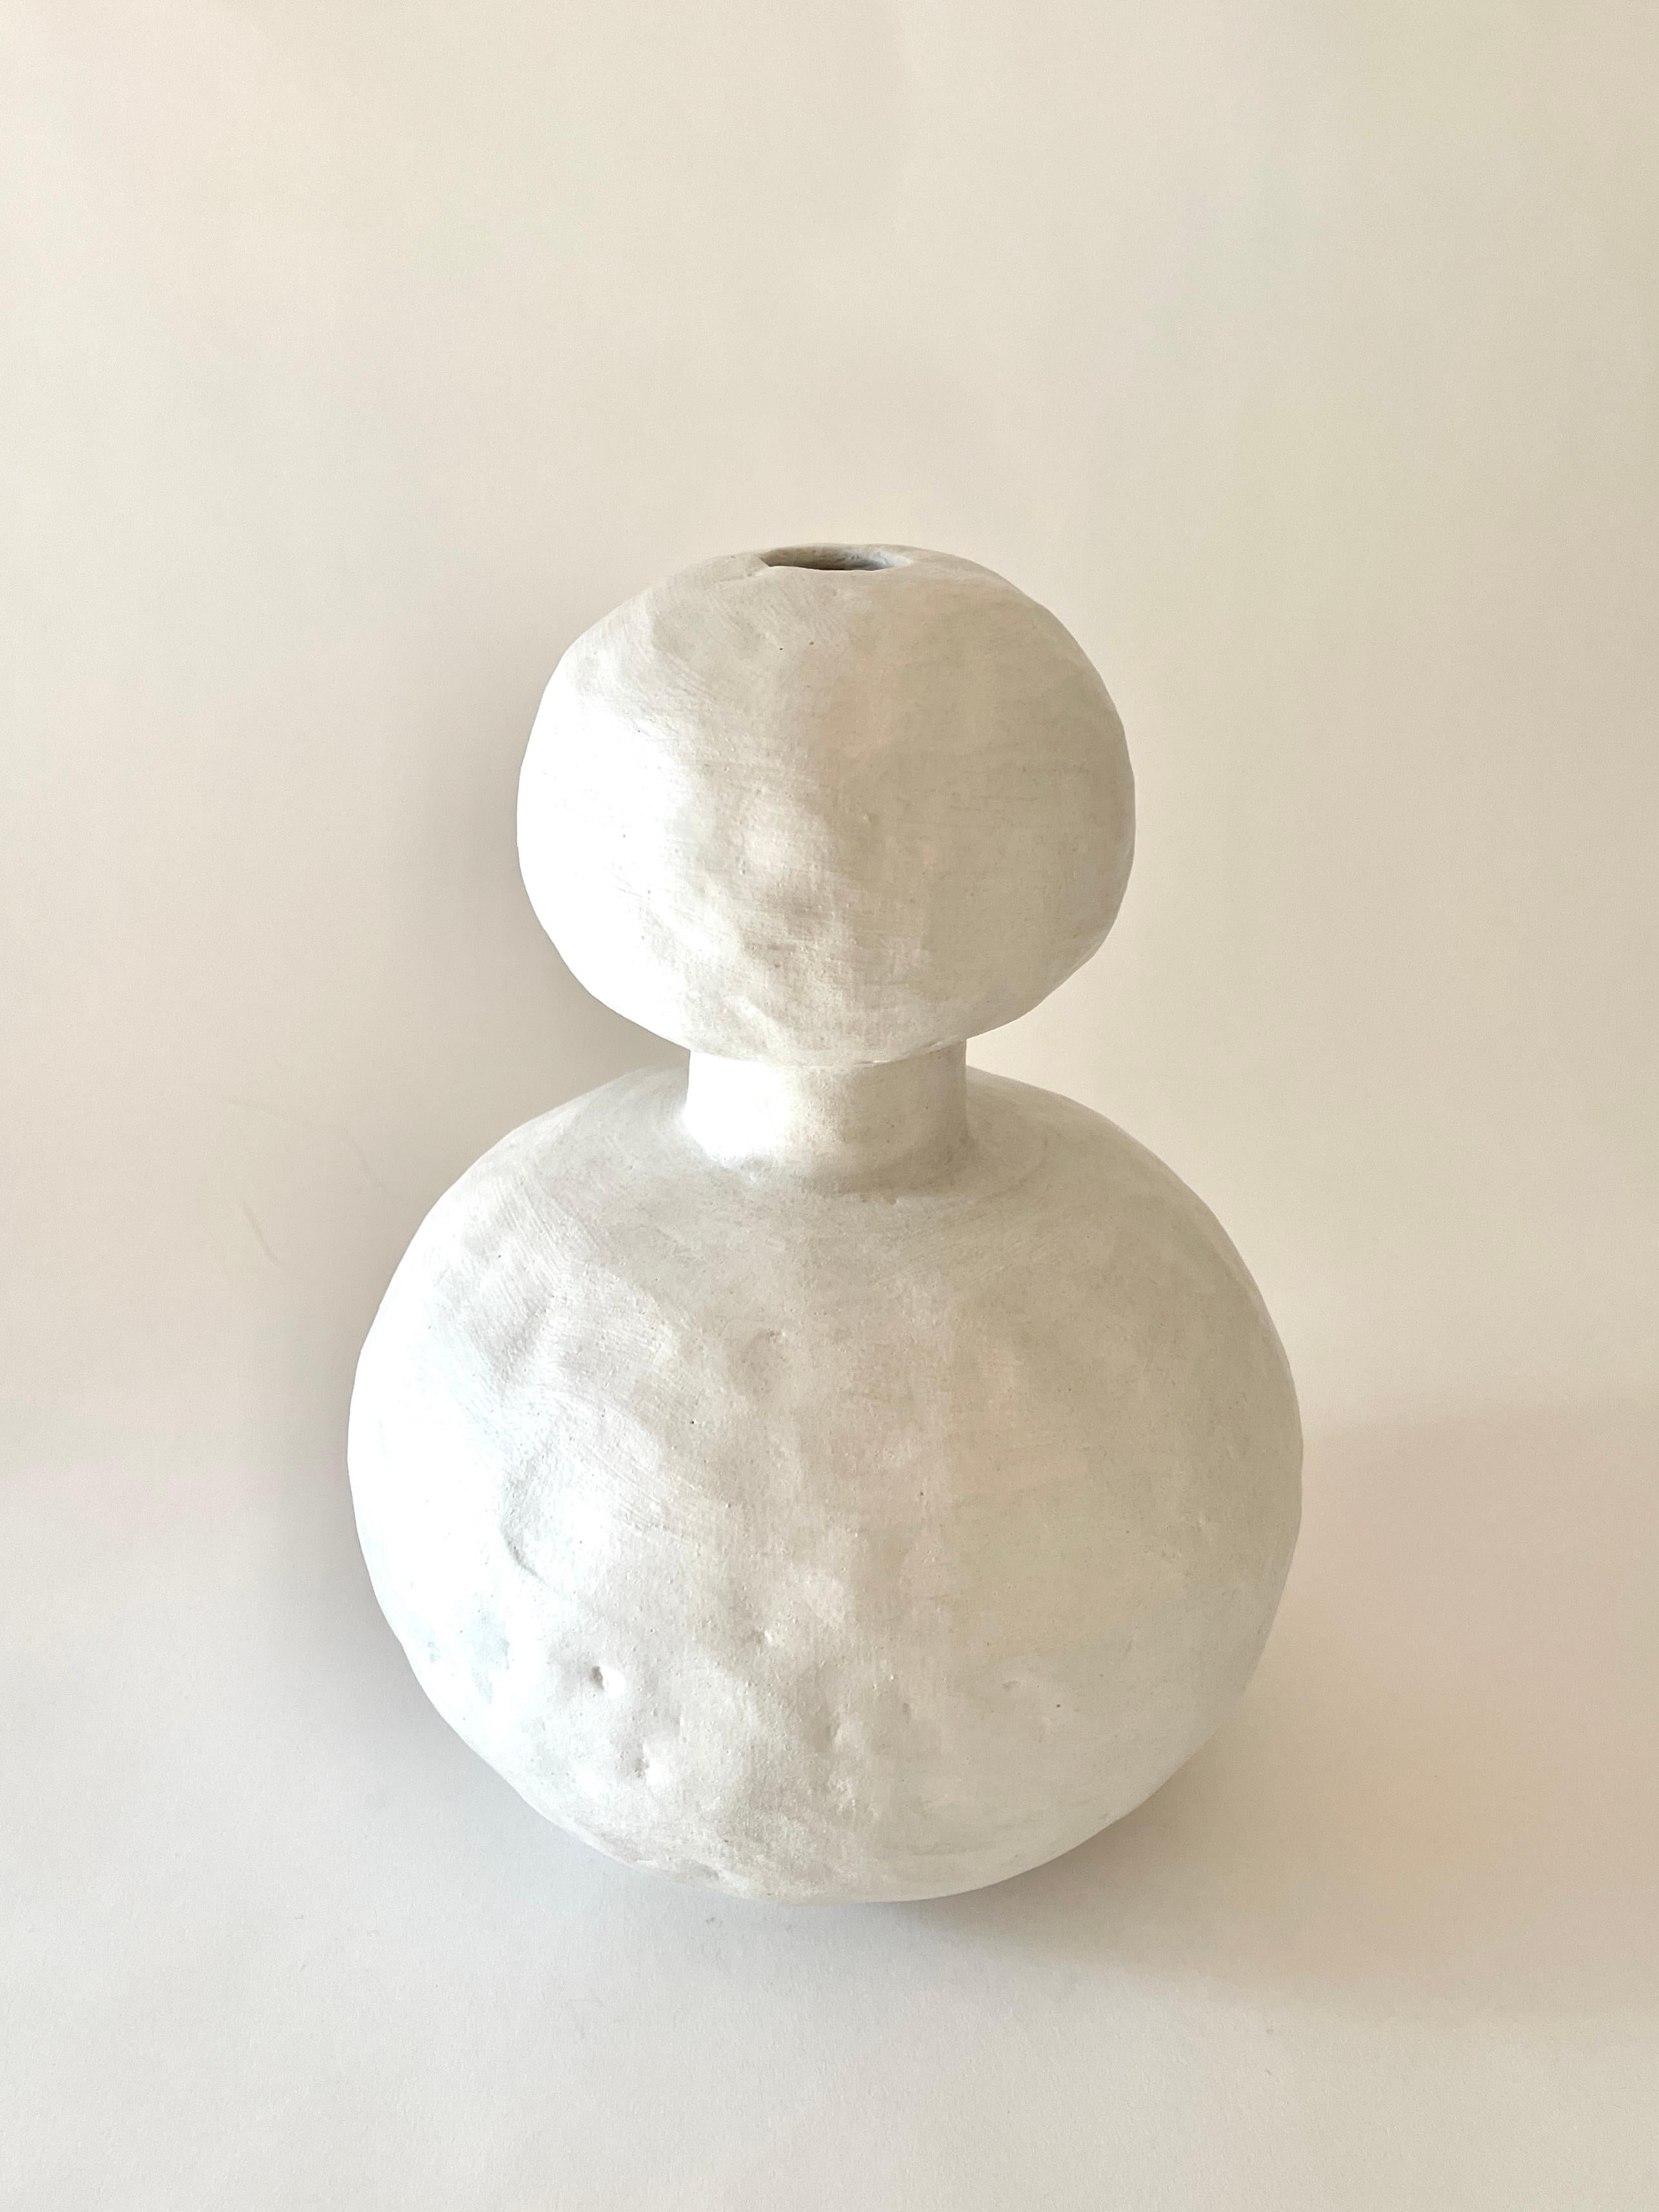 Jules White vase by Meg Morrison
Materials: Ceramic.
Dimensions: Ø 23 x H 32 cm.

Available in Black, White, Yellow and Pink finishes. All sizes are approximate. Although vases are watertight condensation may form on the bottom. Please protect